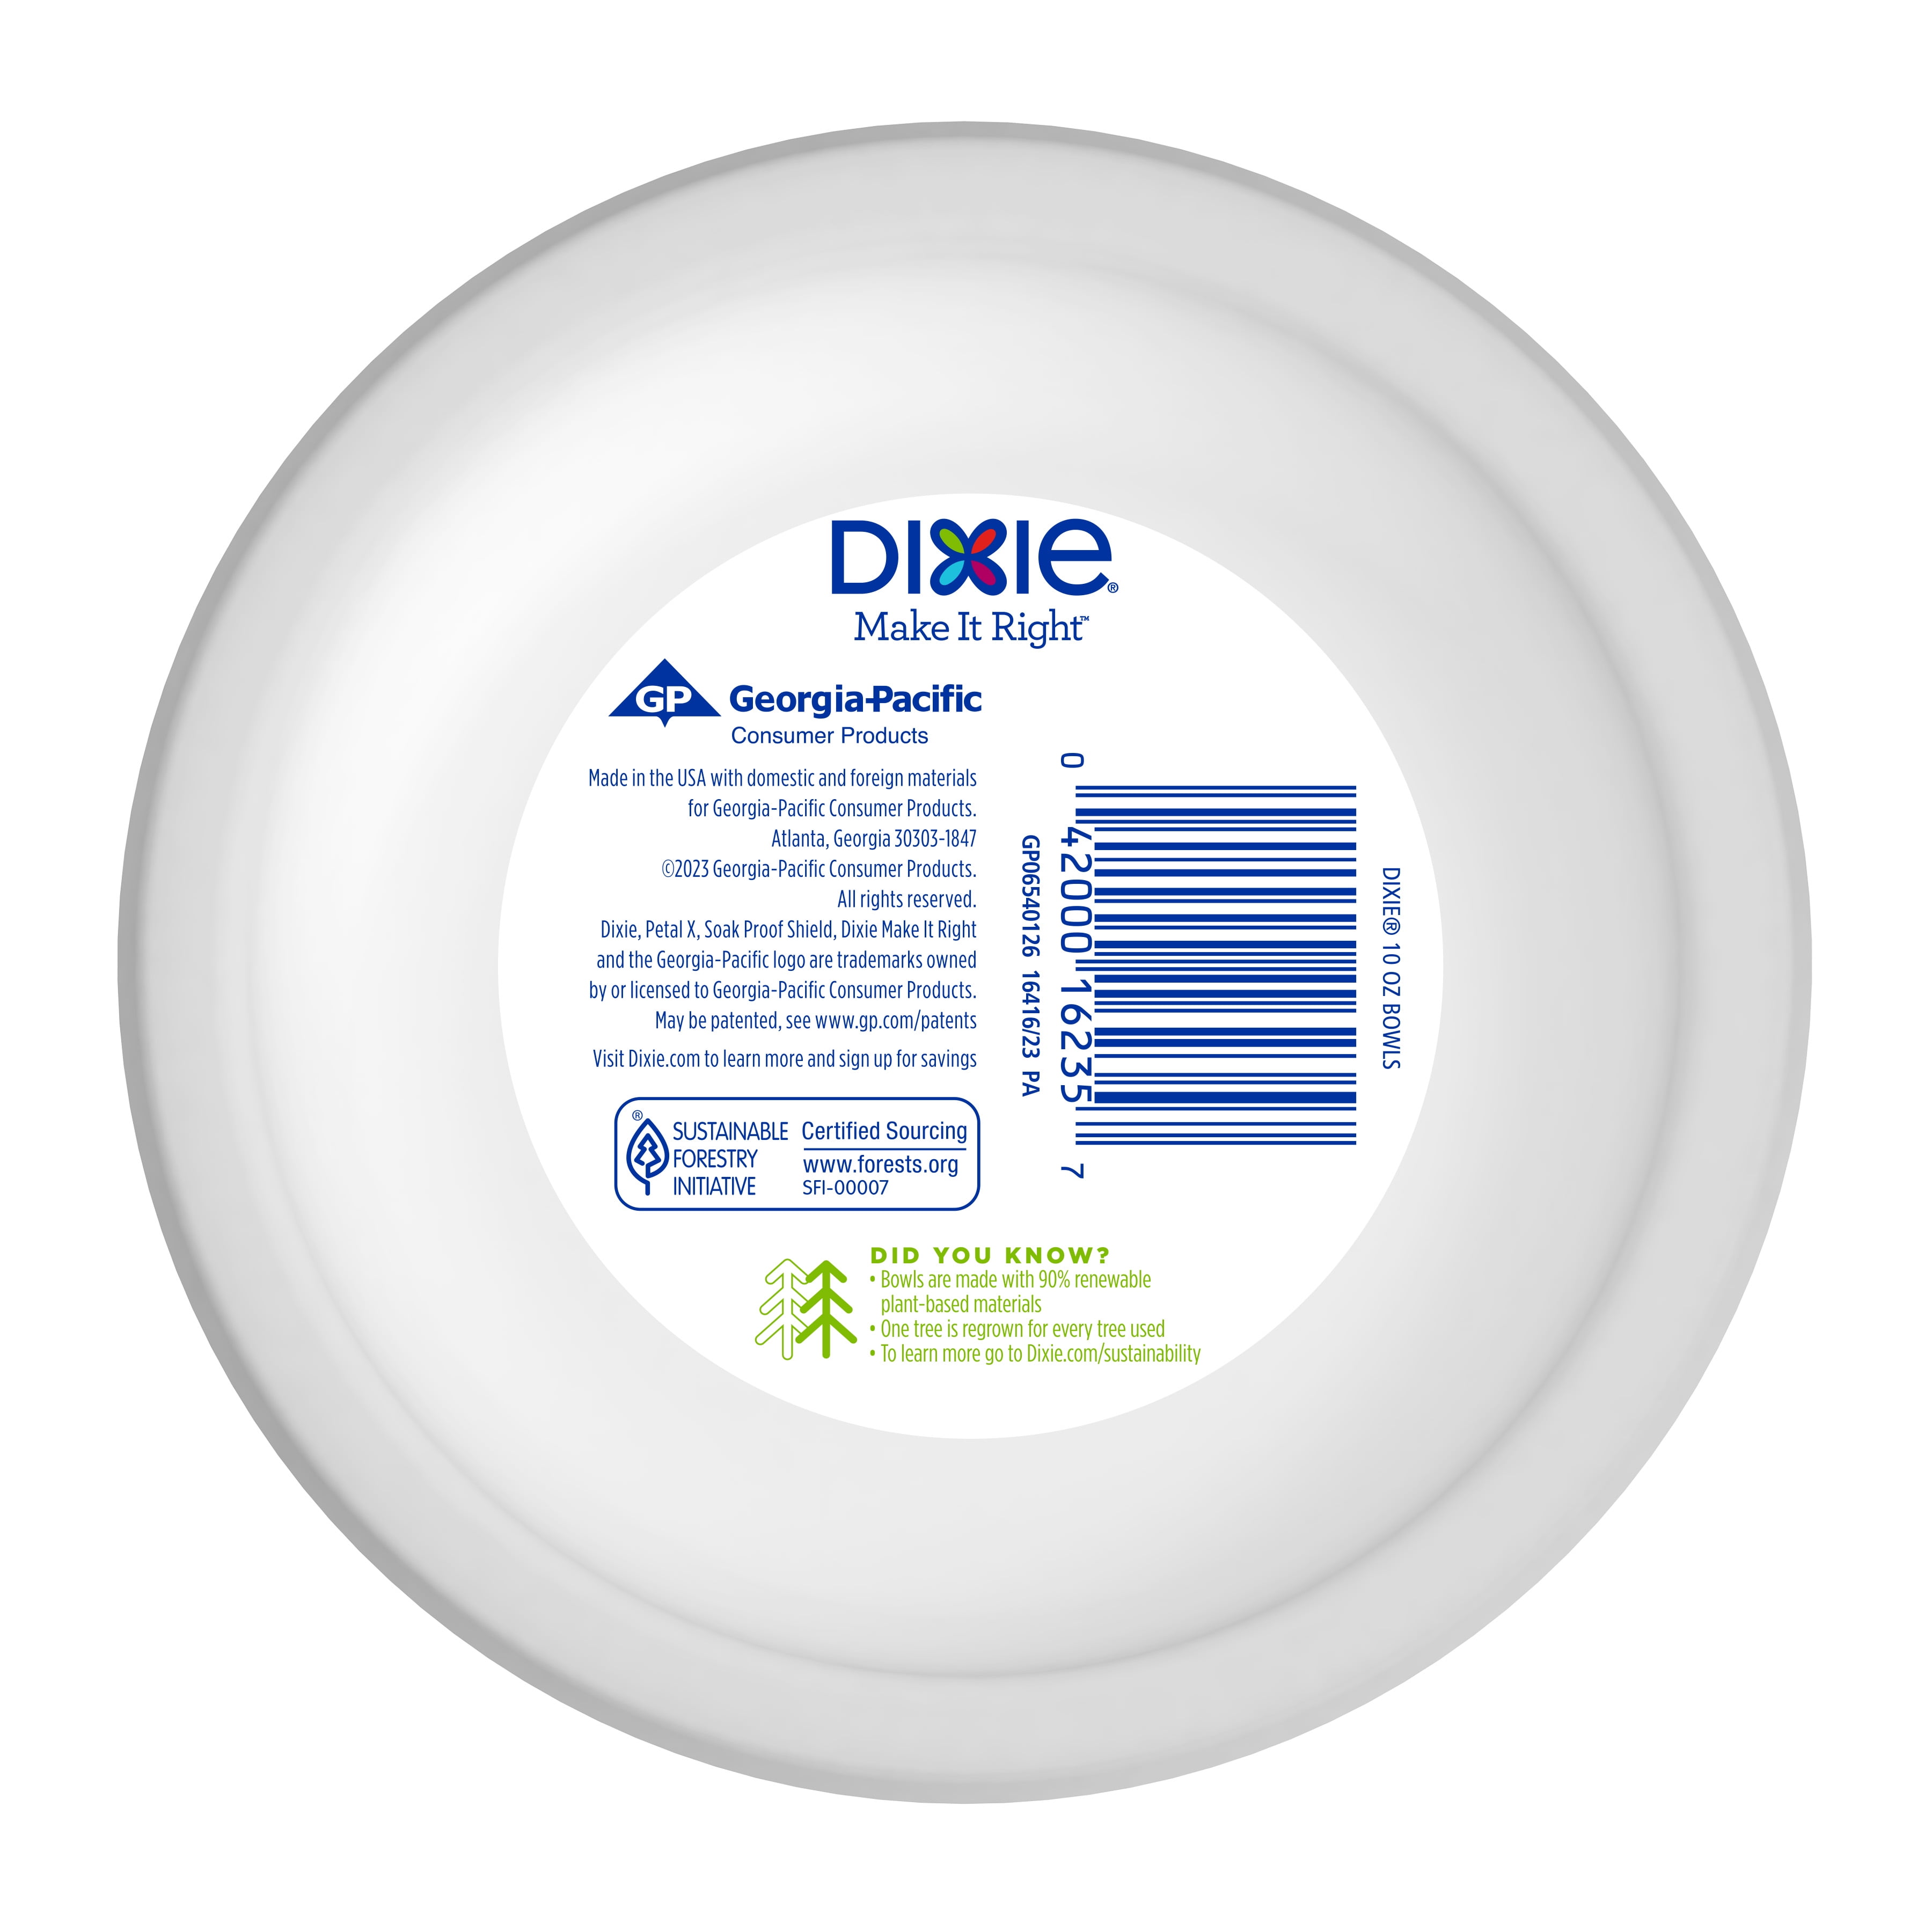 Dixie Ultra® Disposable Large Paper Plates, 11 ½ inch, Dinner Size